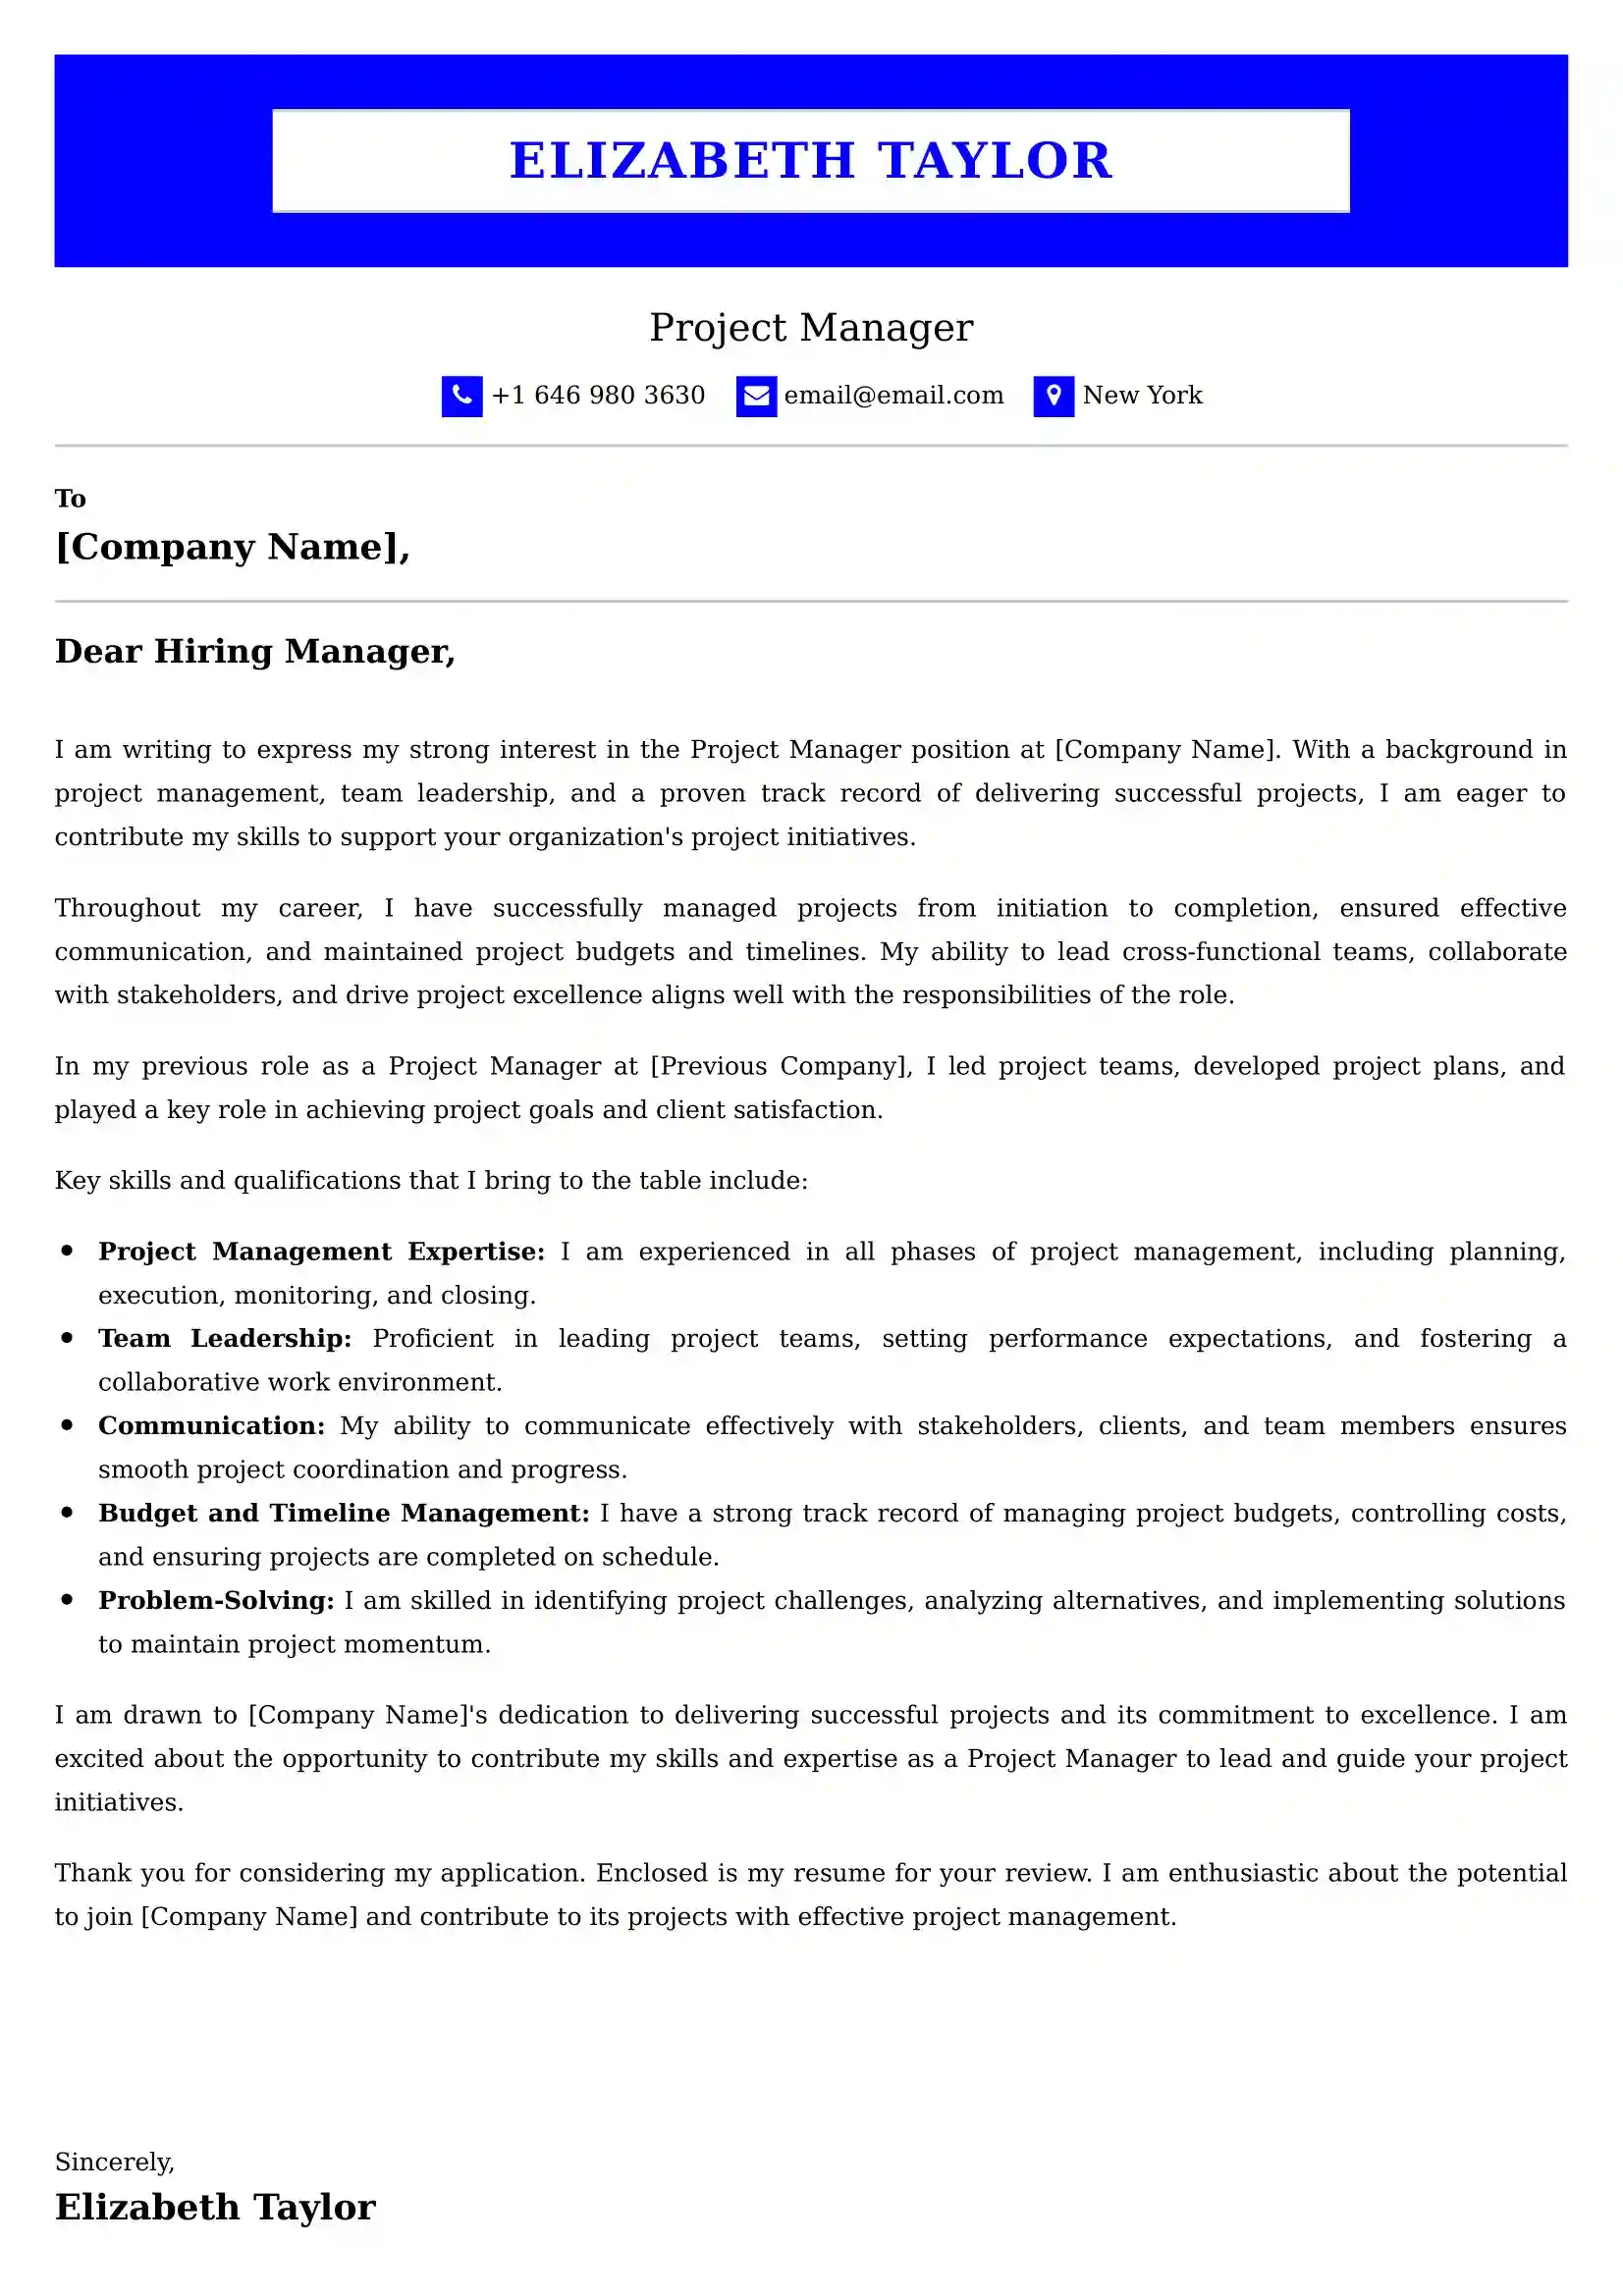 Project Manager Cover Letter Examples - Latest UK Format